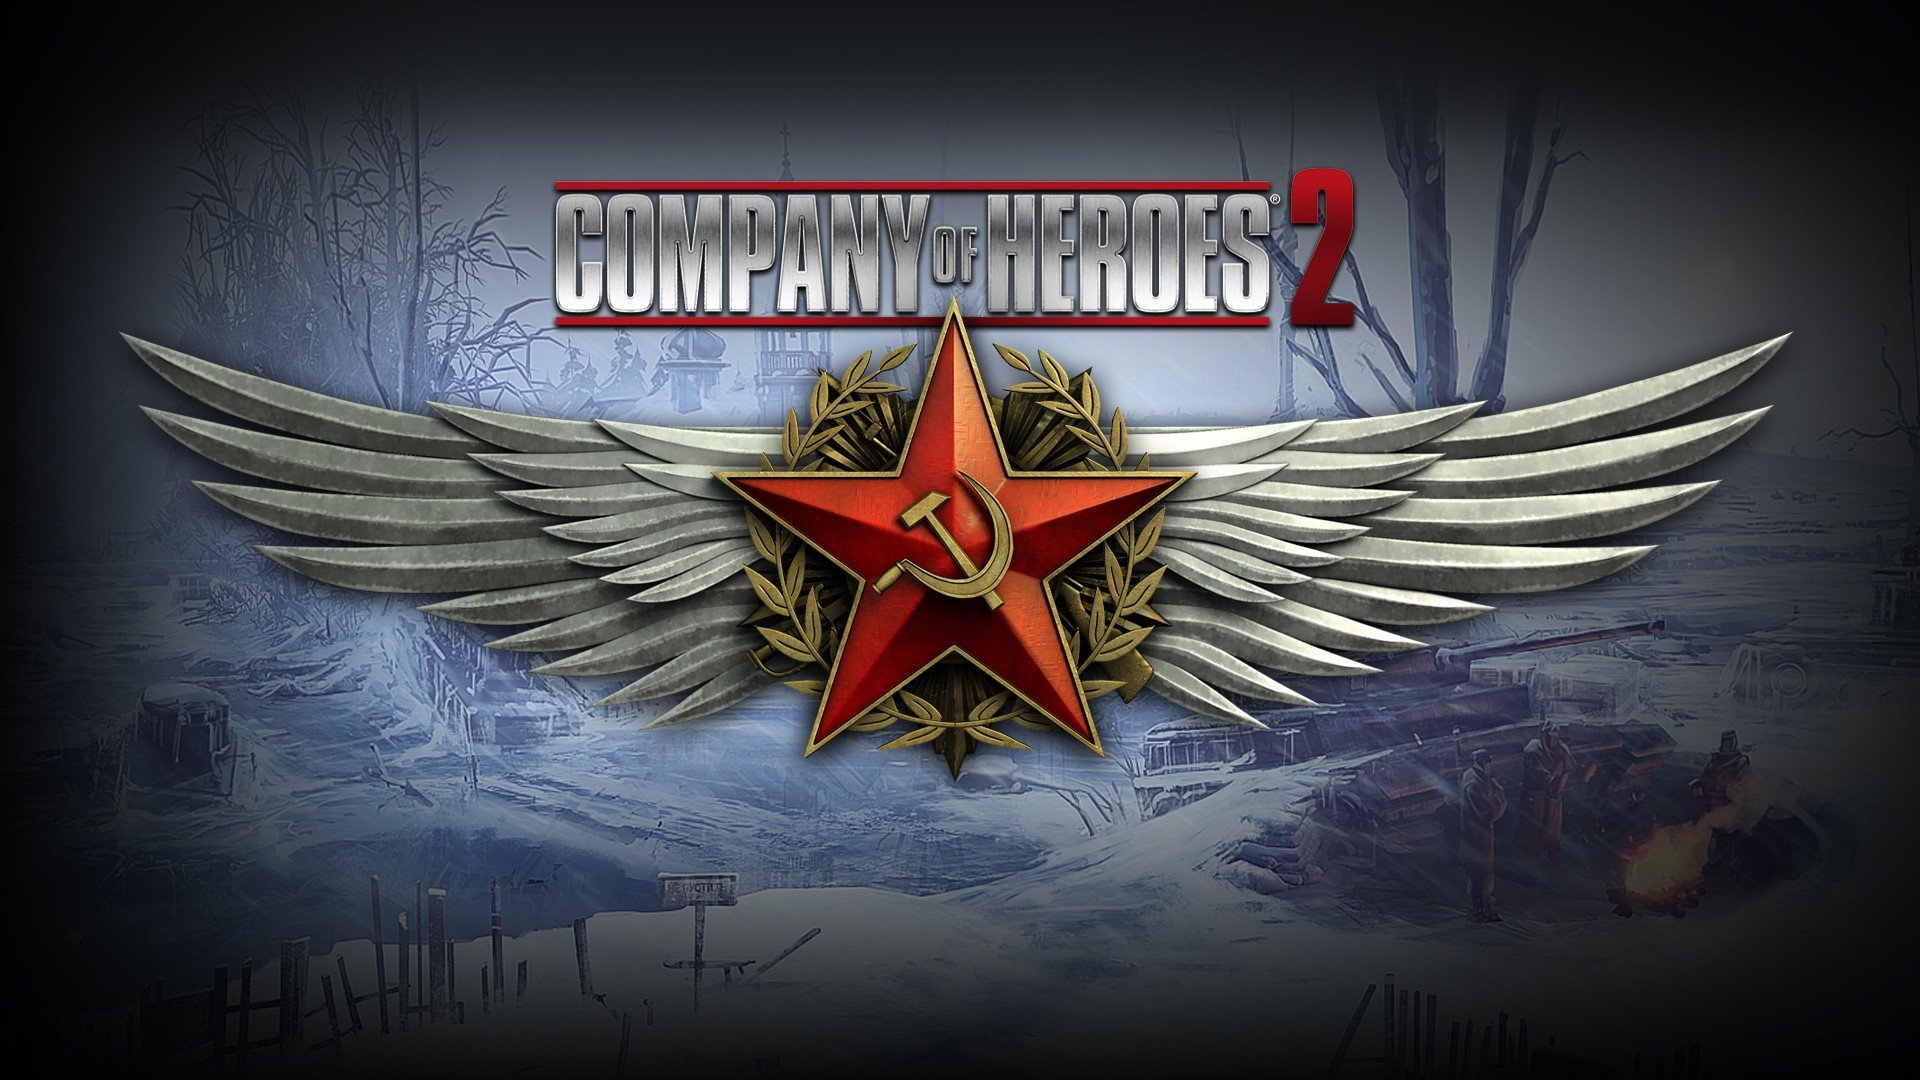 Download full hd 1920x1080 Company Of Heroes 2 computer wallpaper ID:113566 for free